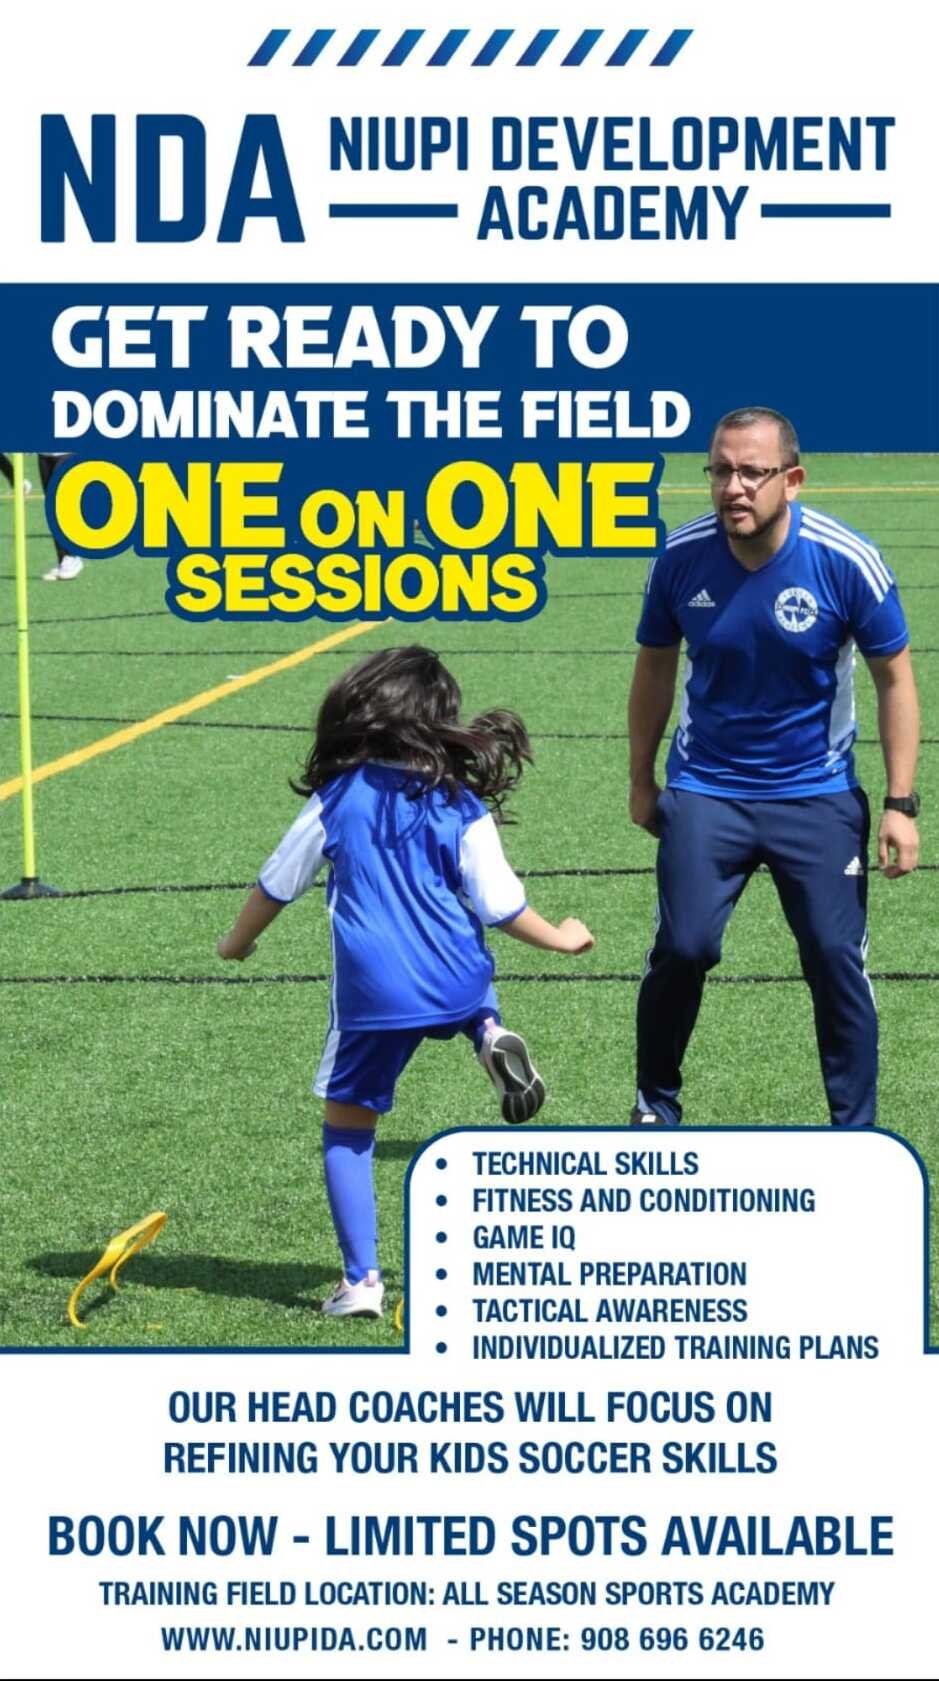 One on One Soccer Training